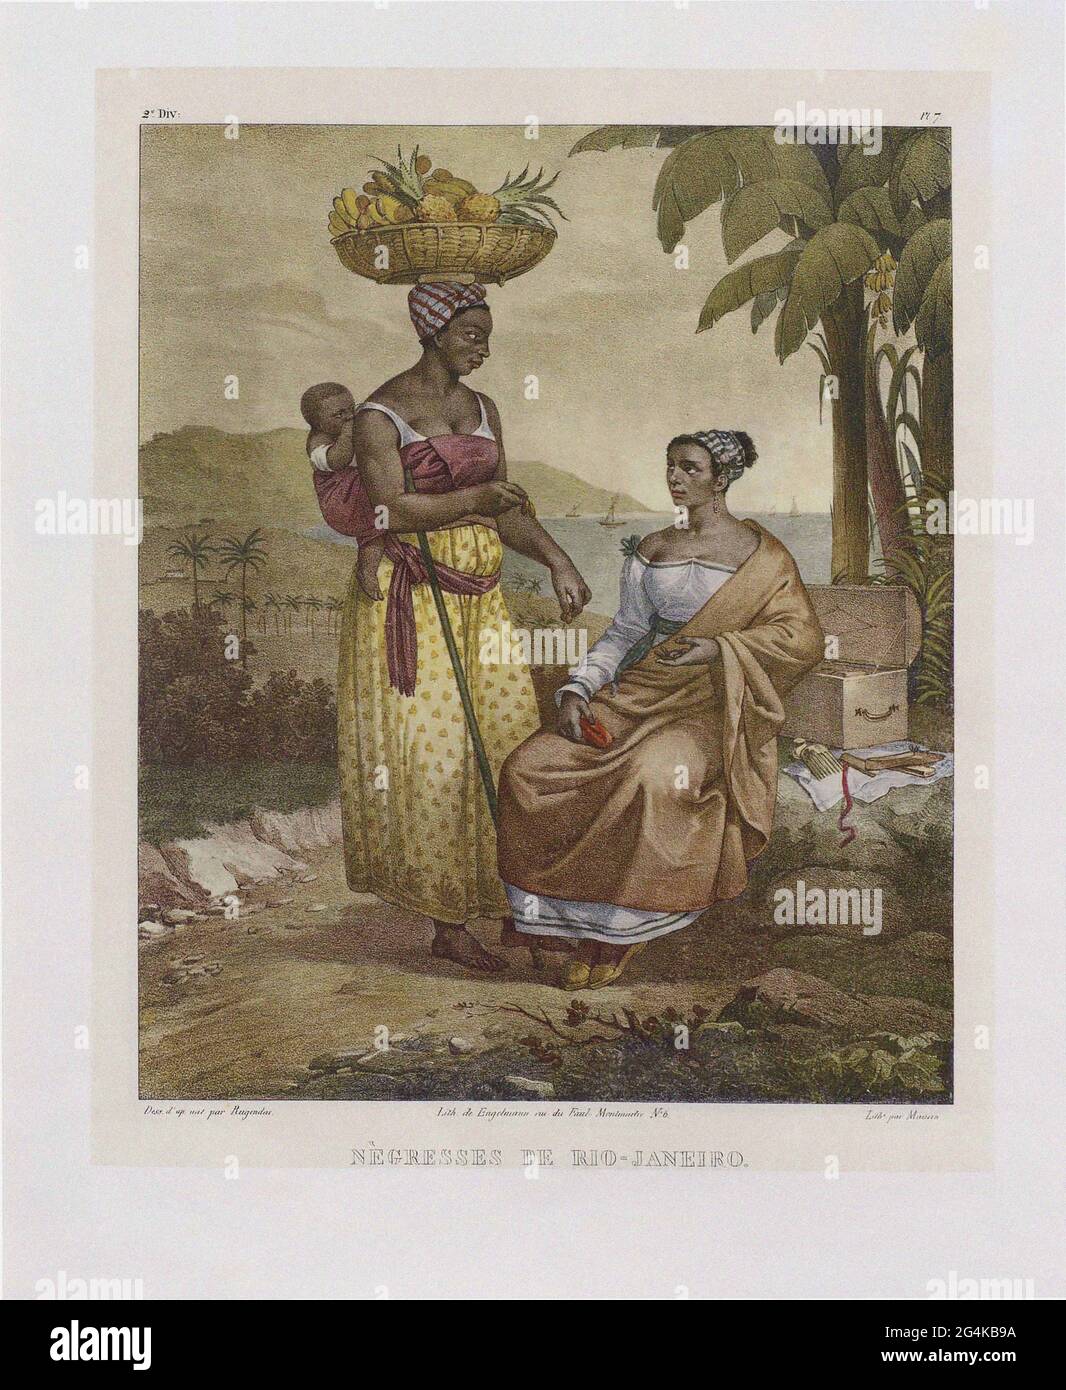 Black women from Rio de Janeiro. From &quot;Malerische Reise in Brasilien&quot;, 1835. Private Collection. Stock Photo